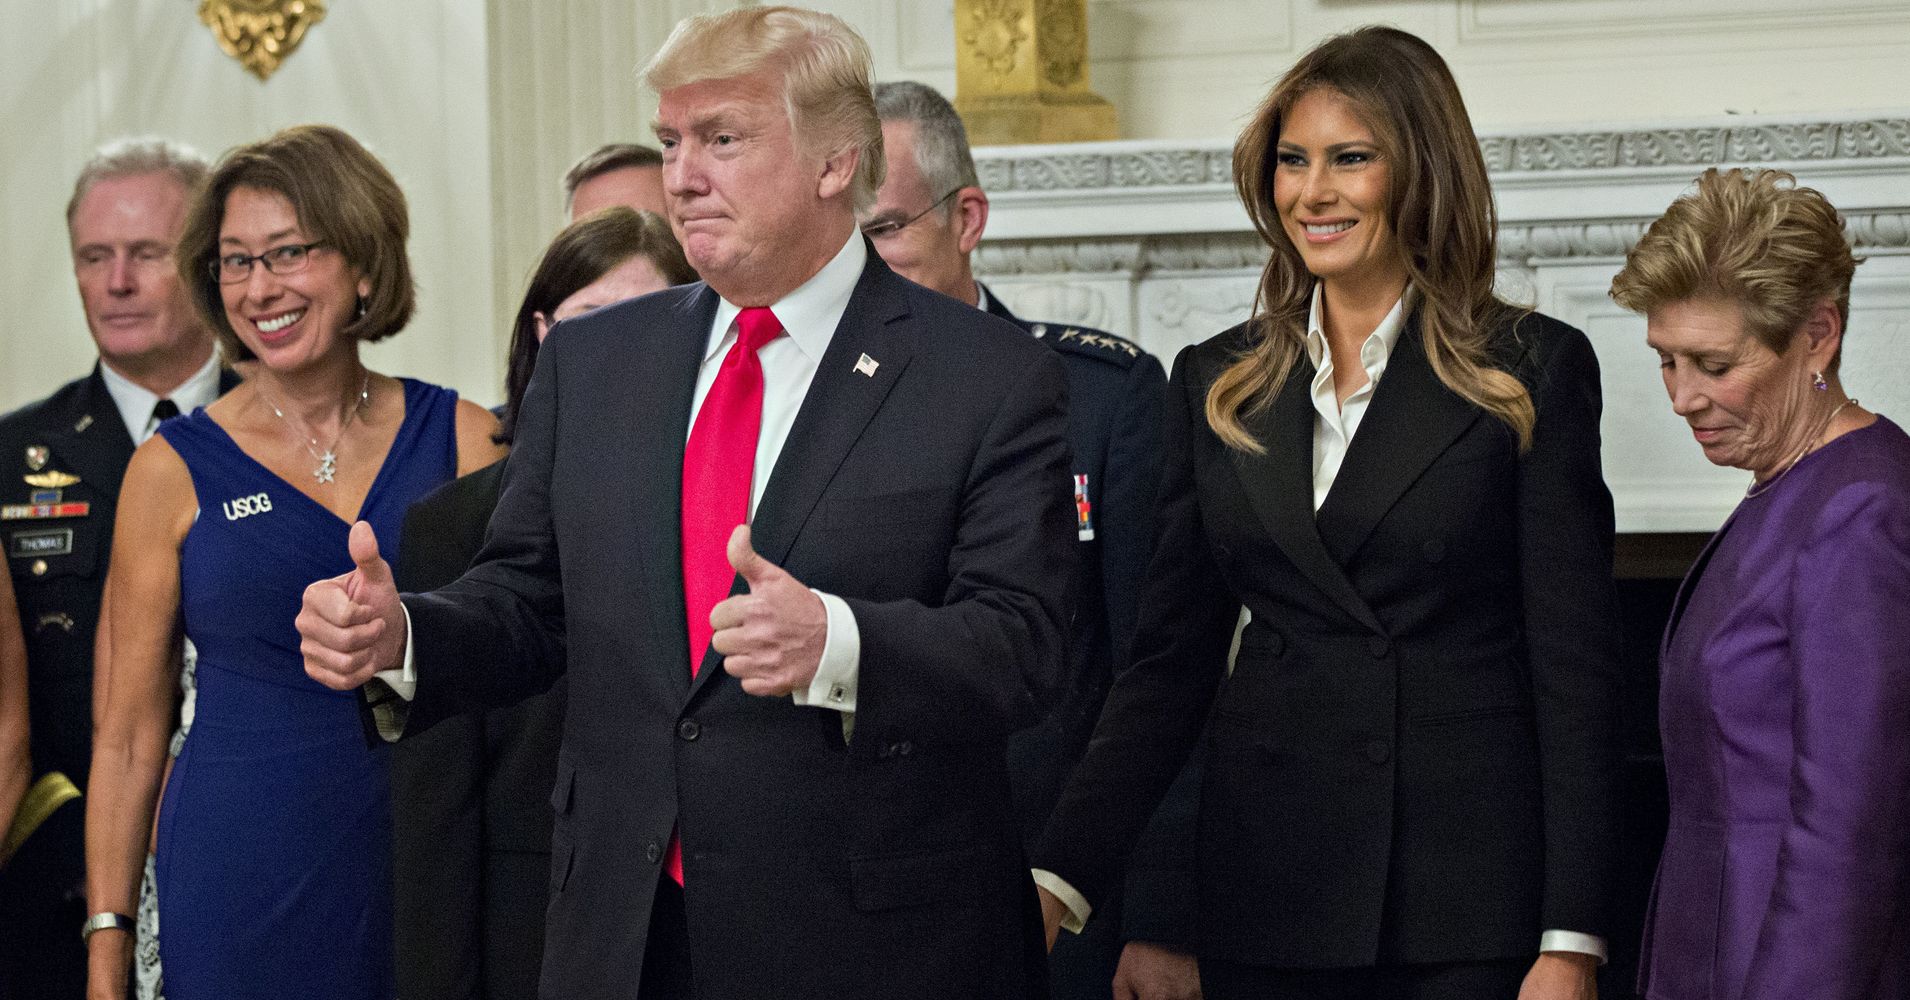 In Bizarre Photo Op Trump Tells Press This Is The Calm Before The Storm Huffpost 3491